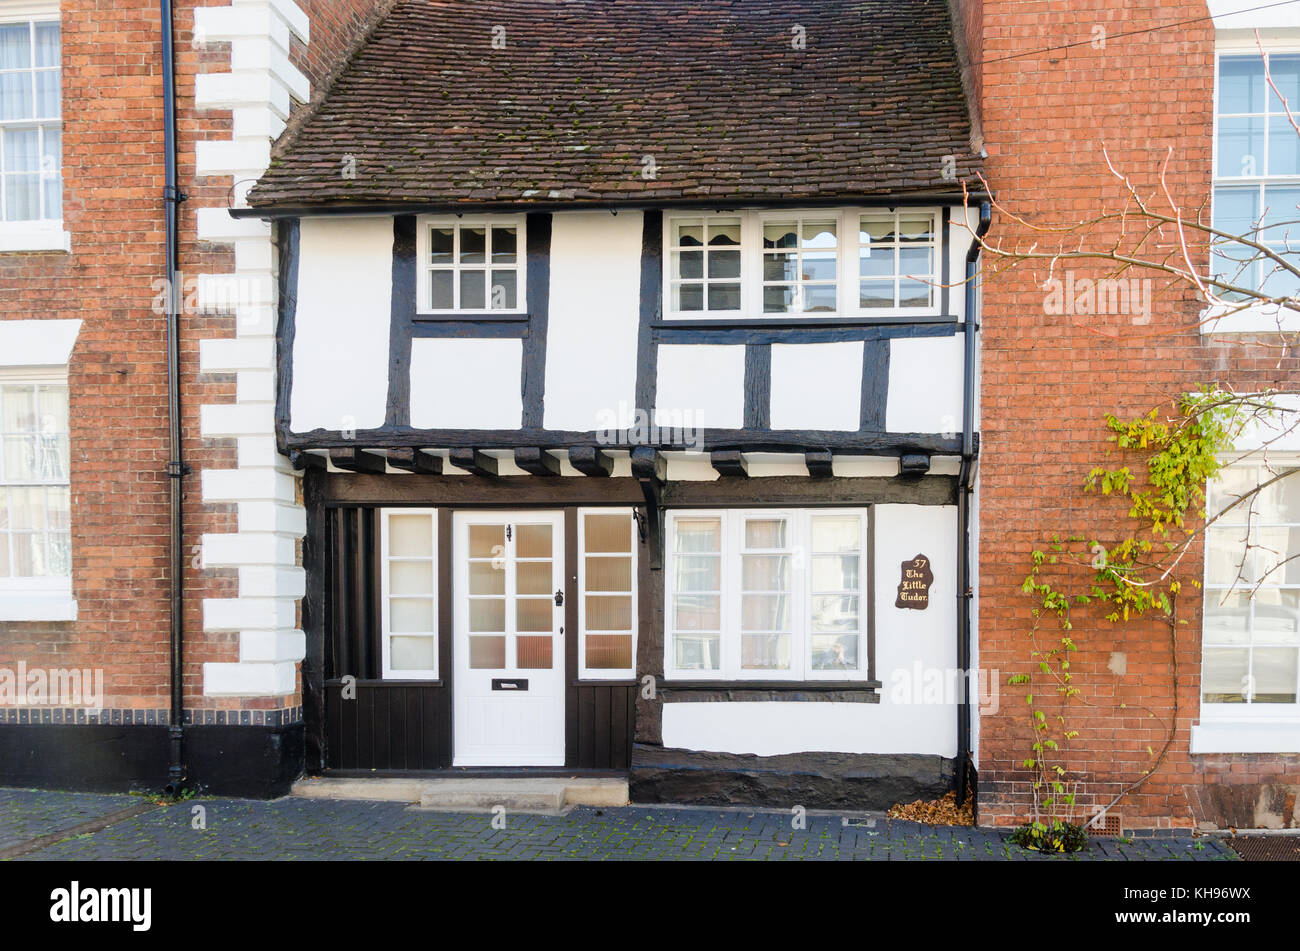 Small timber-framed cottage in West Street, Warwick, Warwickshire, UK Stock Photo